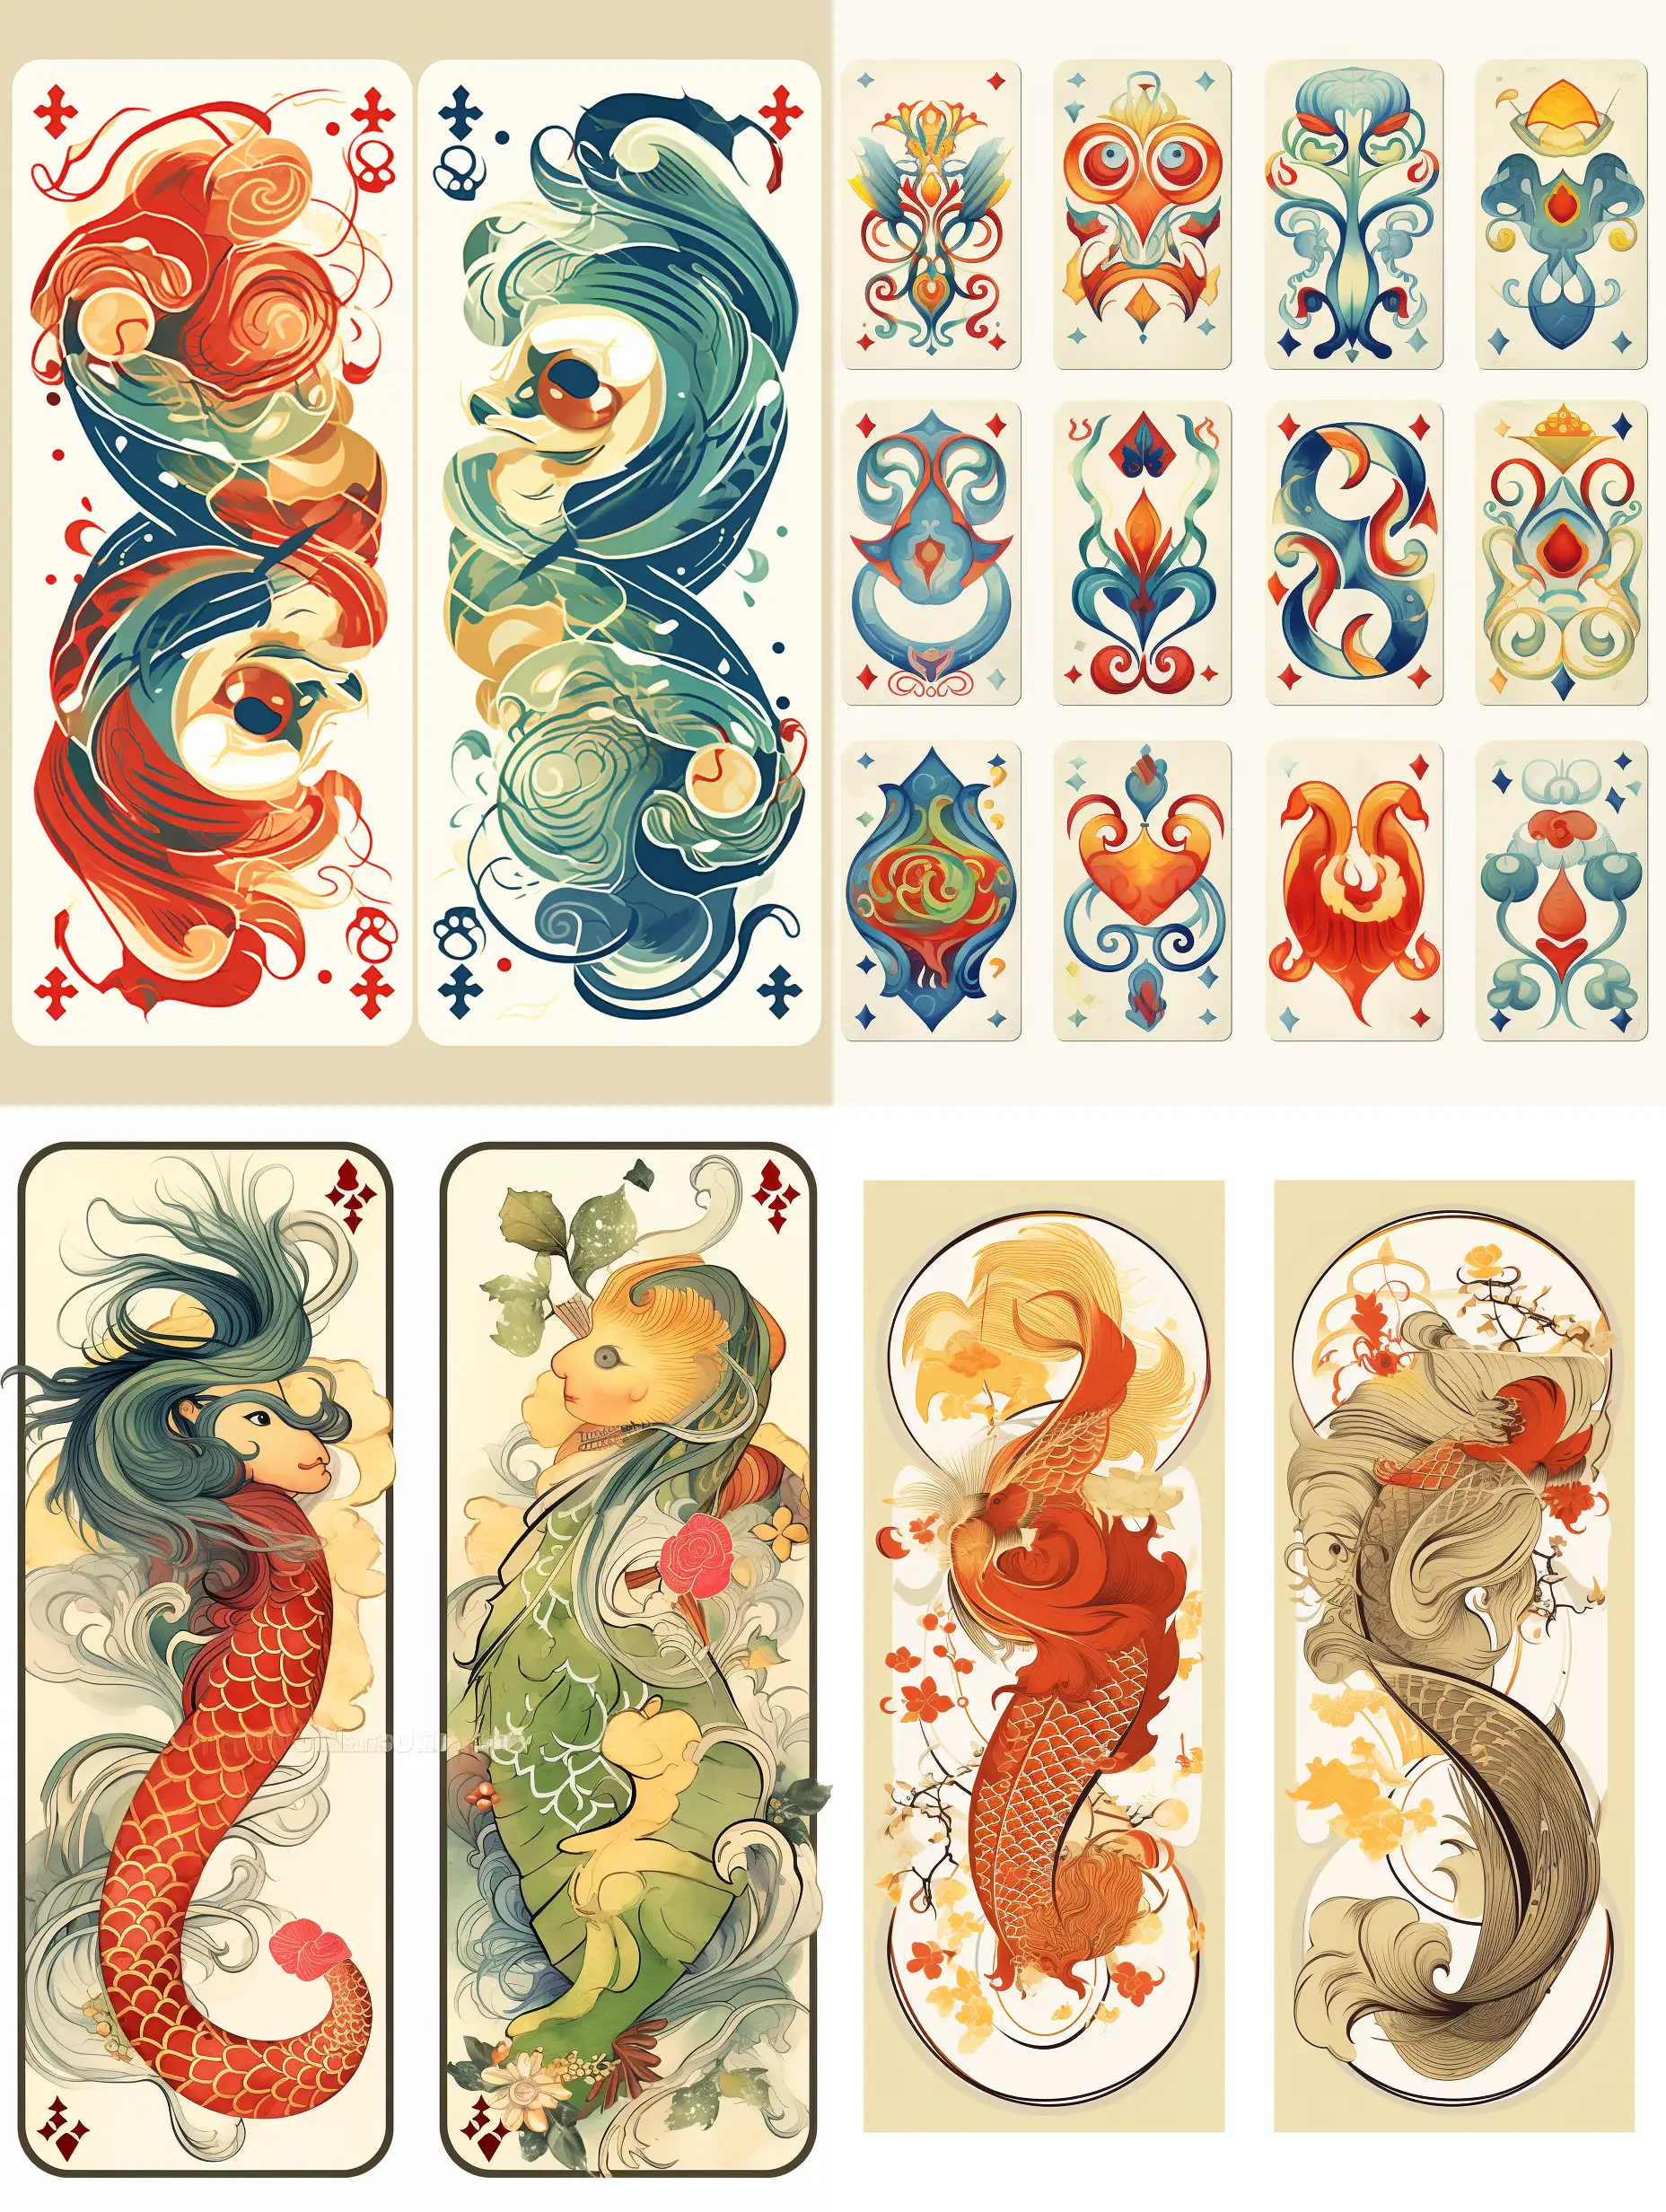 Ancient-Civilization-Inspired-Chinese-New-Year-Playing-Card-Back-Design-with-Dragon-Centerpiece